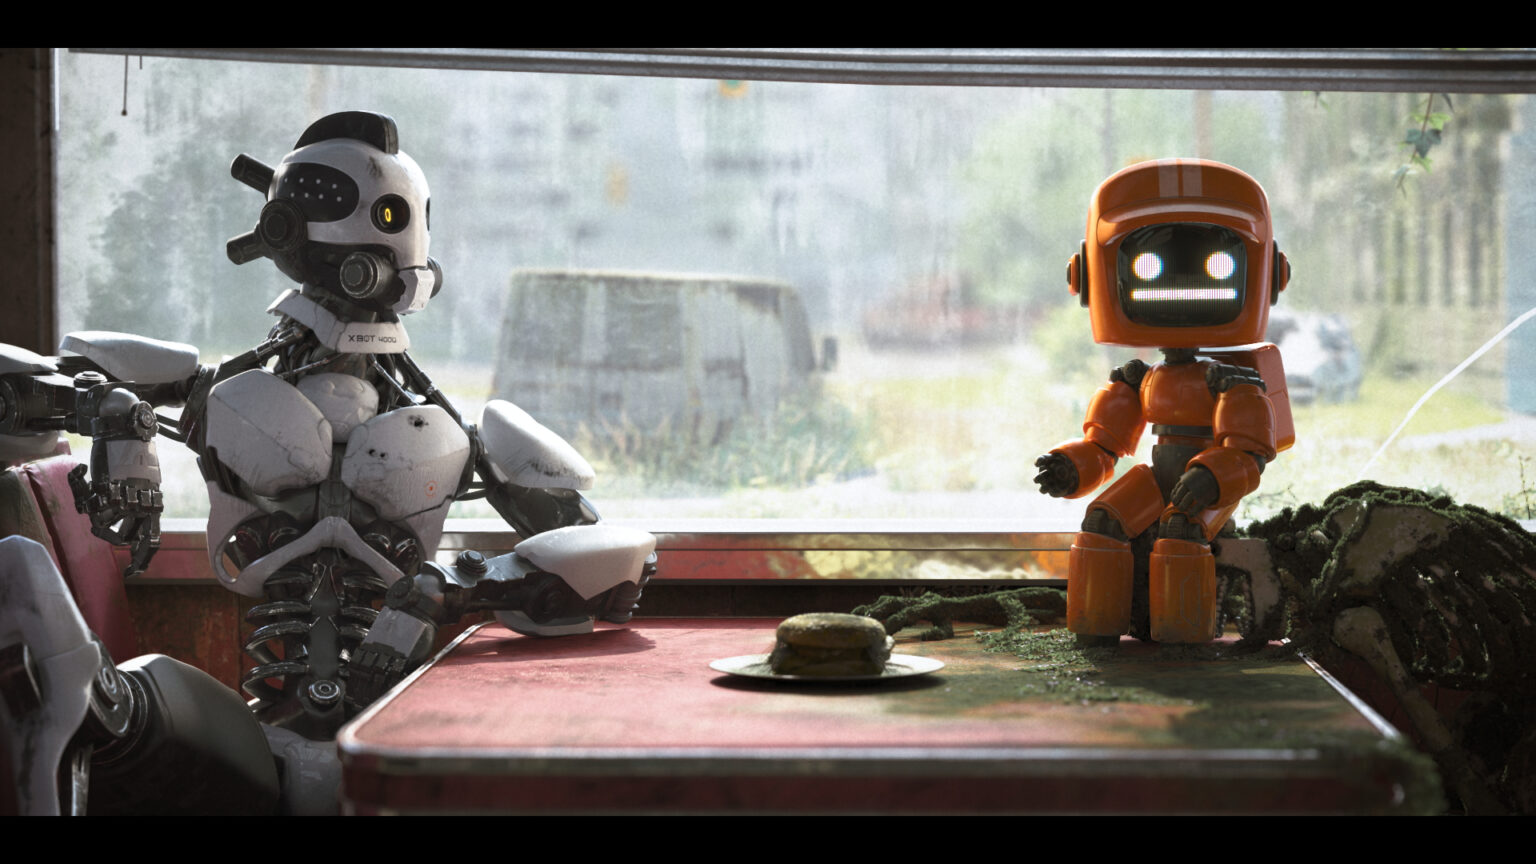 Dipping your toes into 'Love, Death + Robots' for the first time? Peruse the plotlines out the best episodes in the series before you binge.